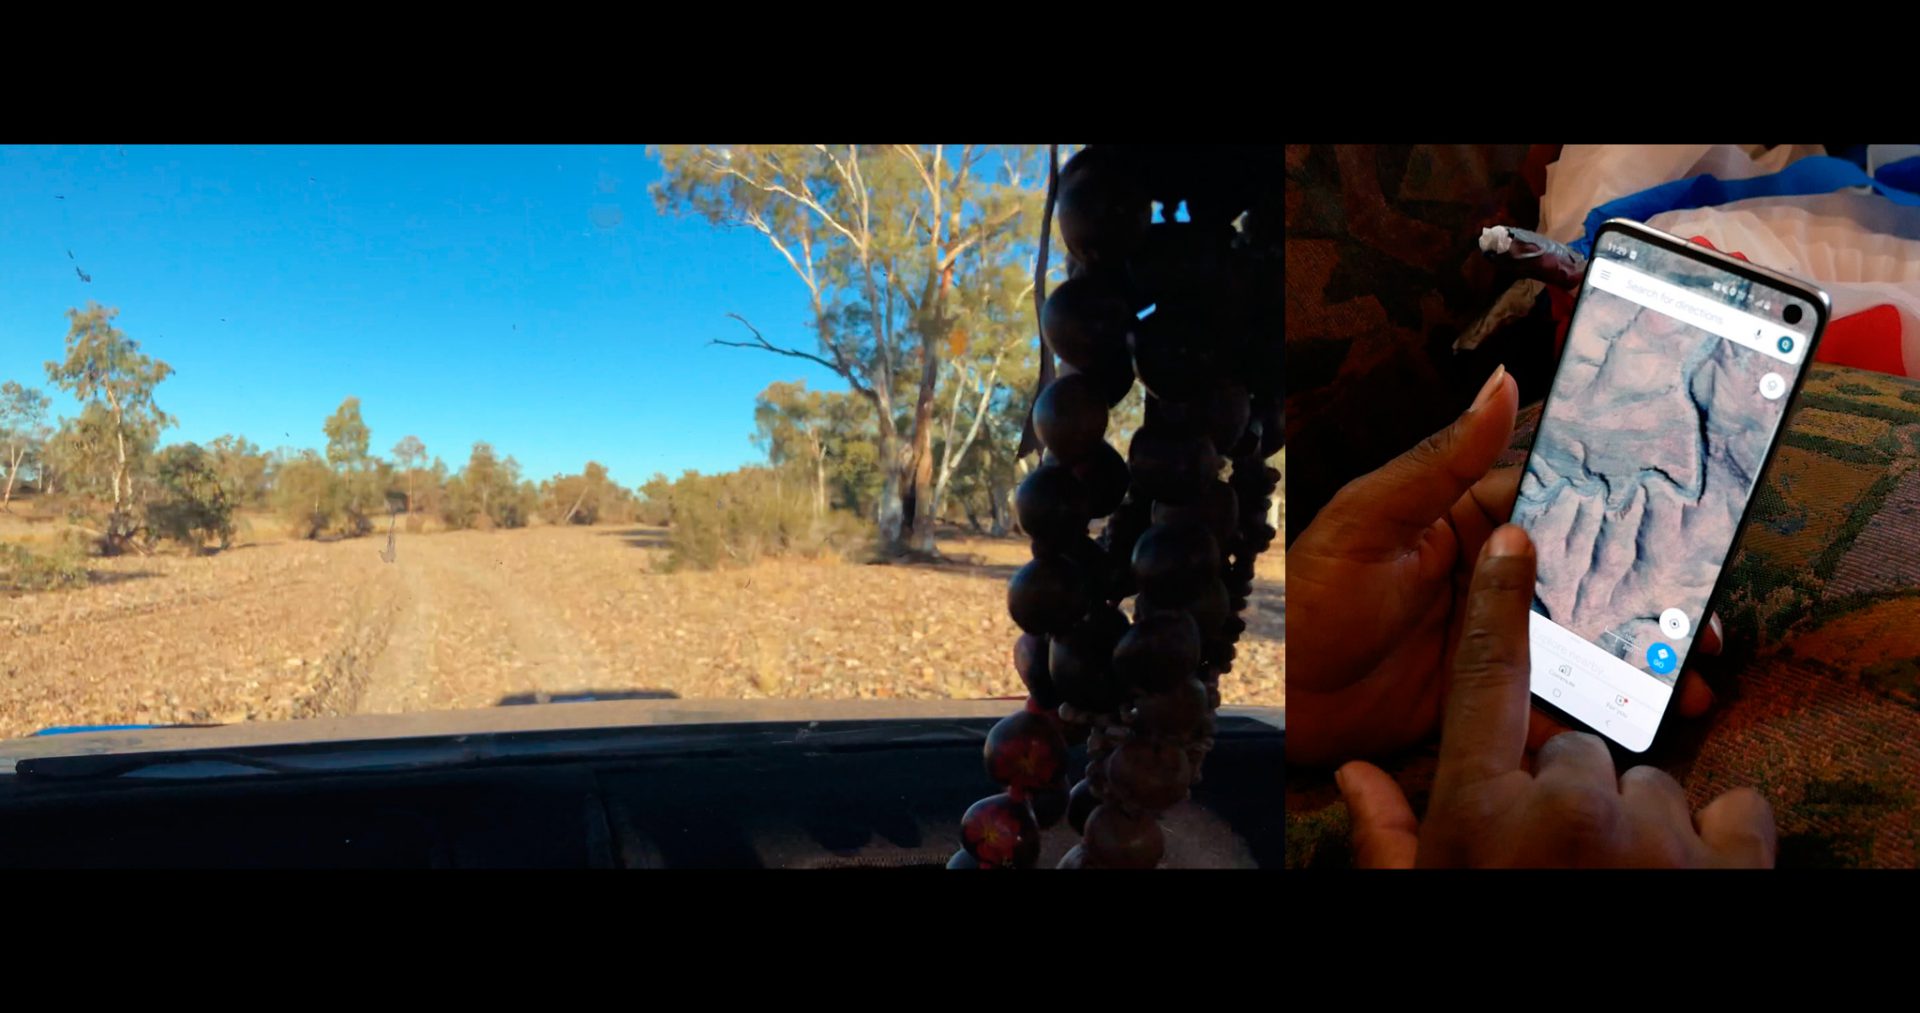 A horizontal image and a vertical image are laid out together. On the left, the horizontal image depicts an arid desert landscape from the perspective of a car dash. In the foreground, chunky beads hang from the rearview mirror. In the background are dry mud flats, scrub trees and bushes, and cloudless blue sky. On the right portrait-oriented image, a brown-skinned left hand holds out a smartphone and the right-hand index finger points at an image on the smartphone screen. The smartphone screen depicts a topographical satellite image of a dry landscape with a water-less river bed.